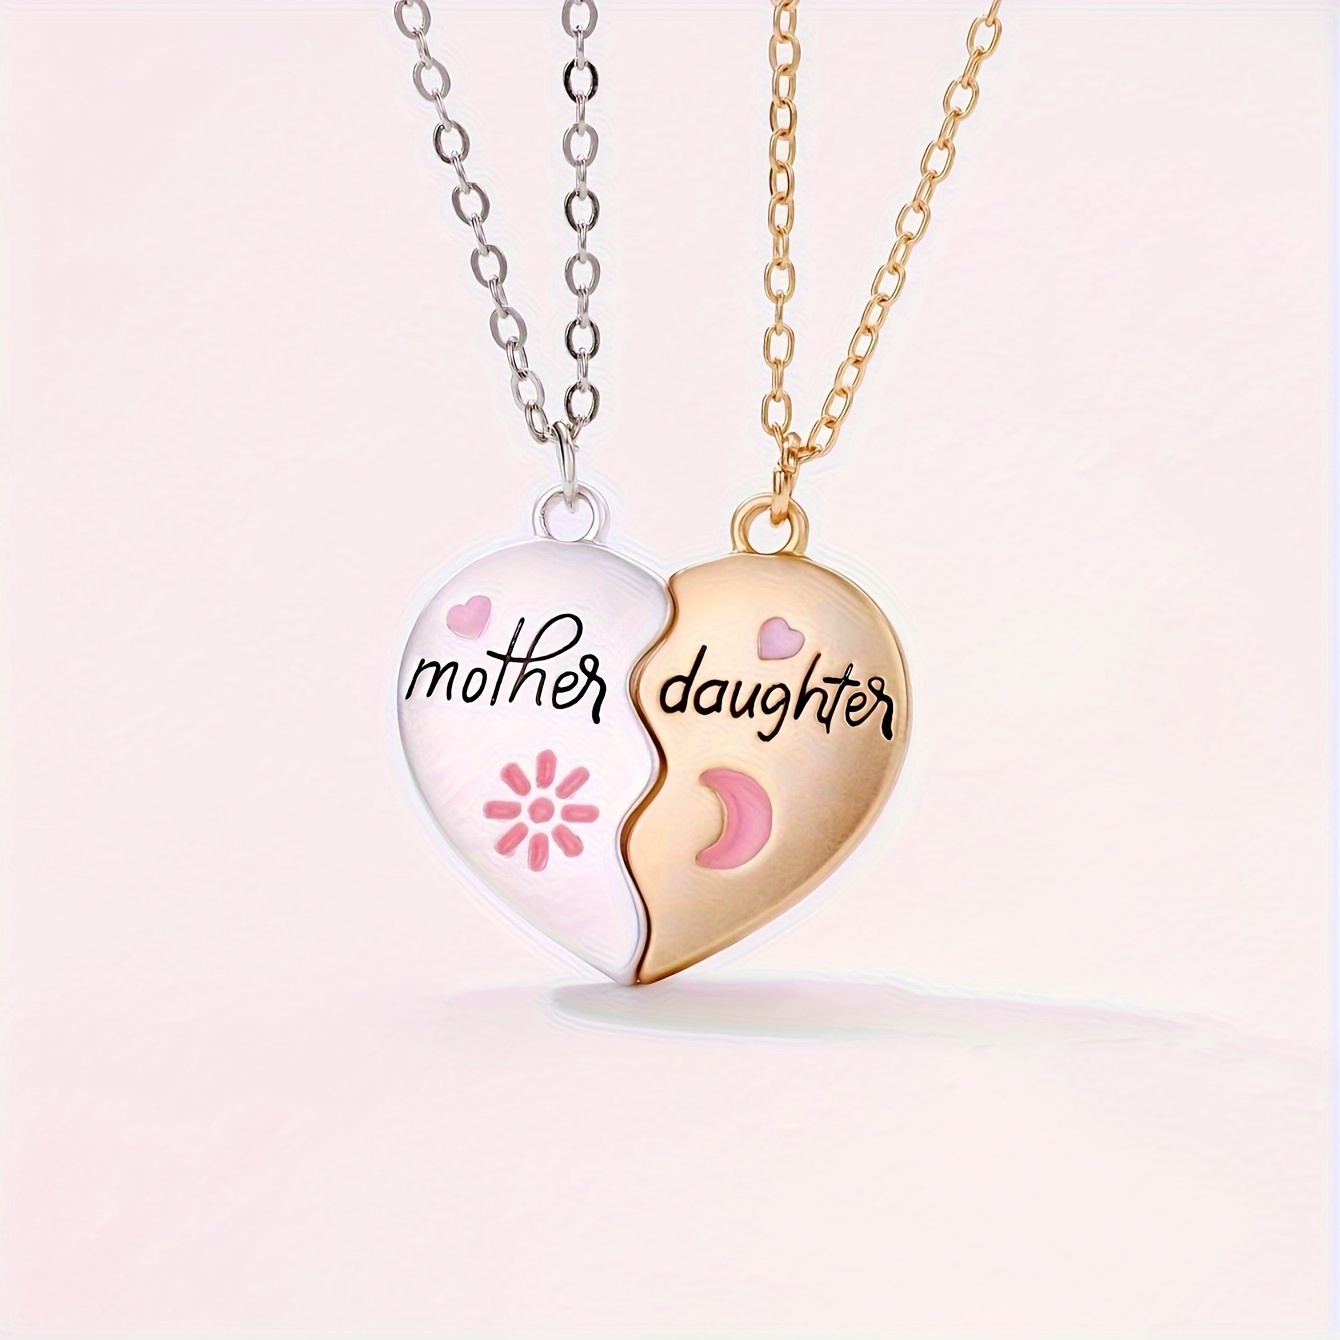 

2pcs Sun & Moon Decor Matching Heart-shaped Pendant Necklace Set, Zinc Alloy Enamel Jewelry Set For Mom & Daughter, Mother's Day Jewelry Gift, Birthday Gift